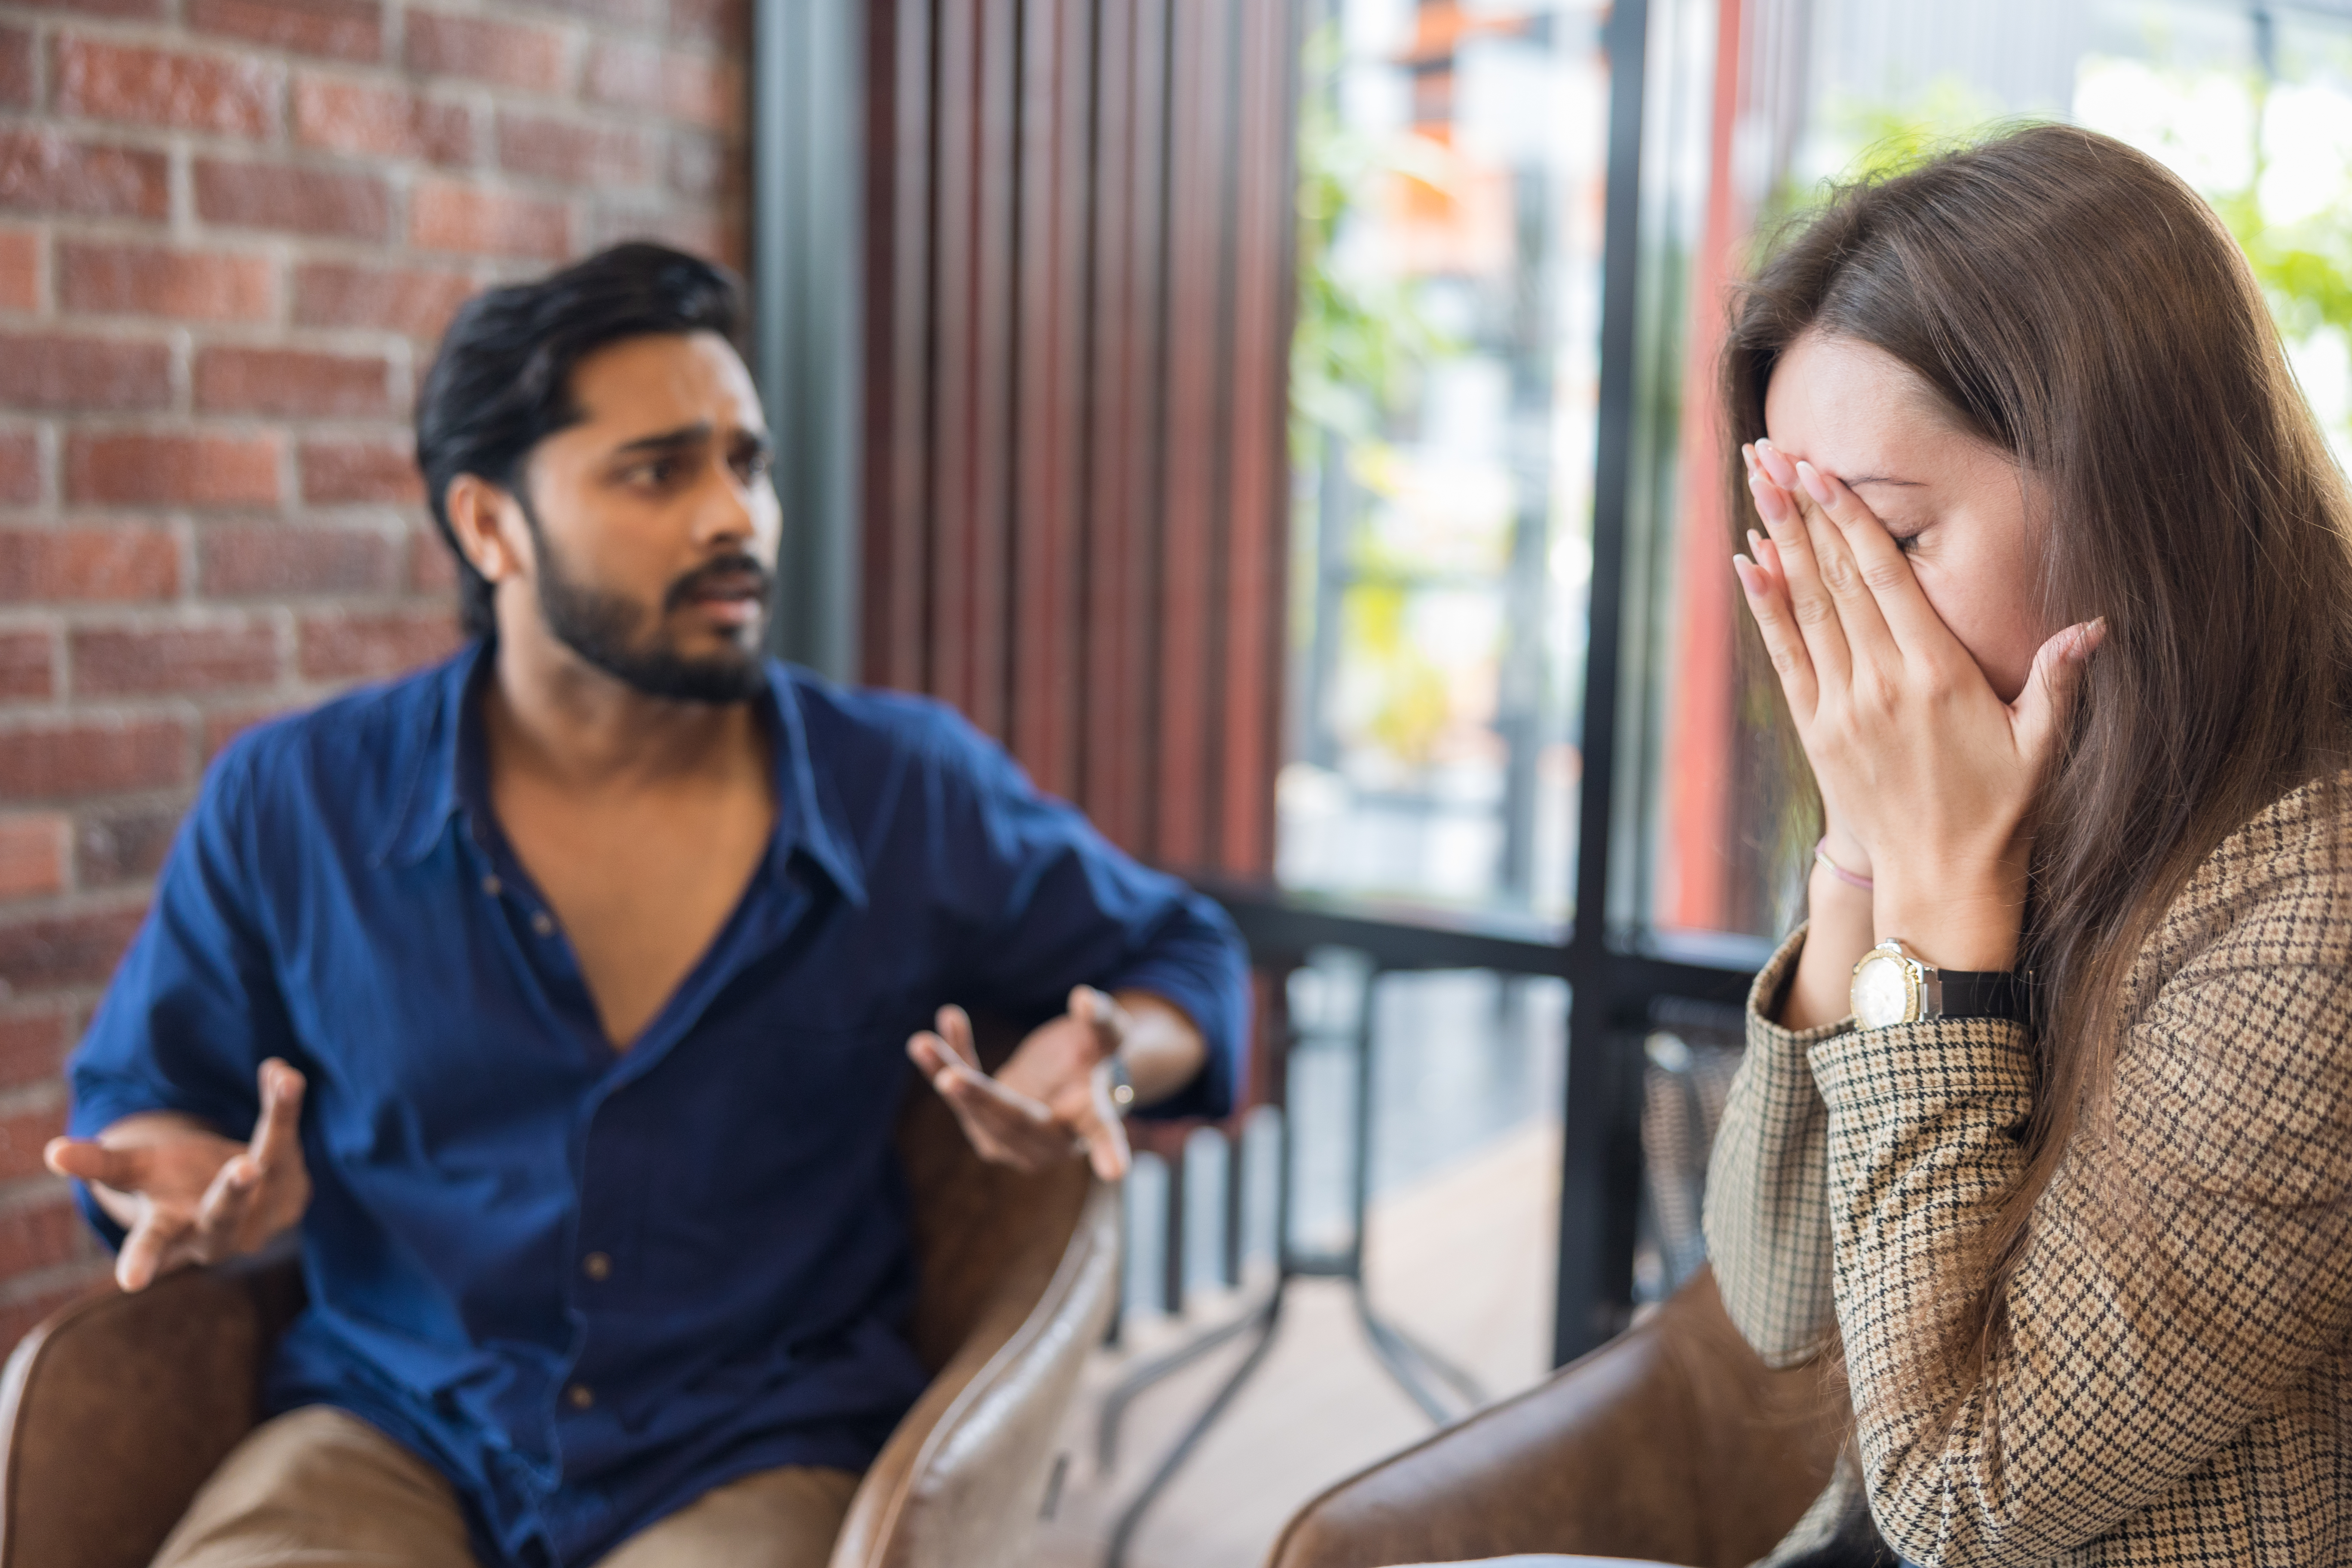 Young couple arguing while having problems in their relationship | Source: Getty Images